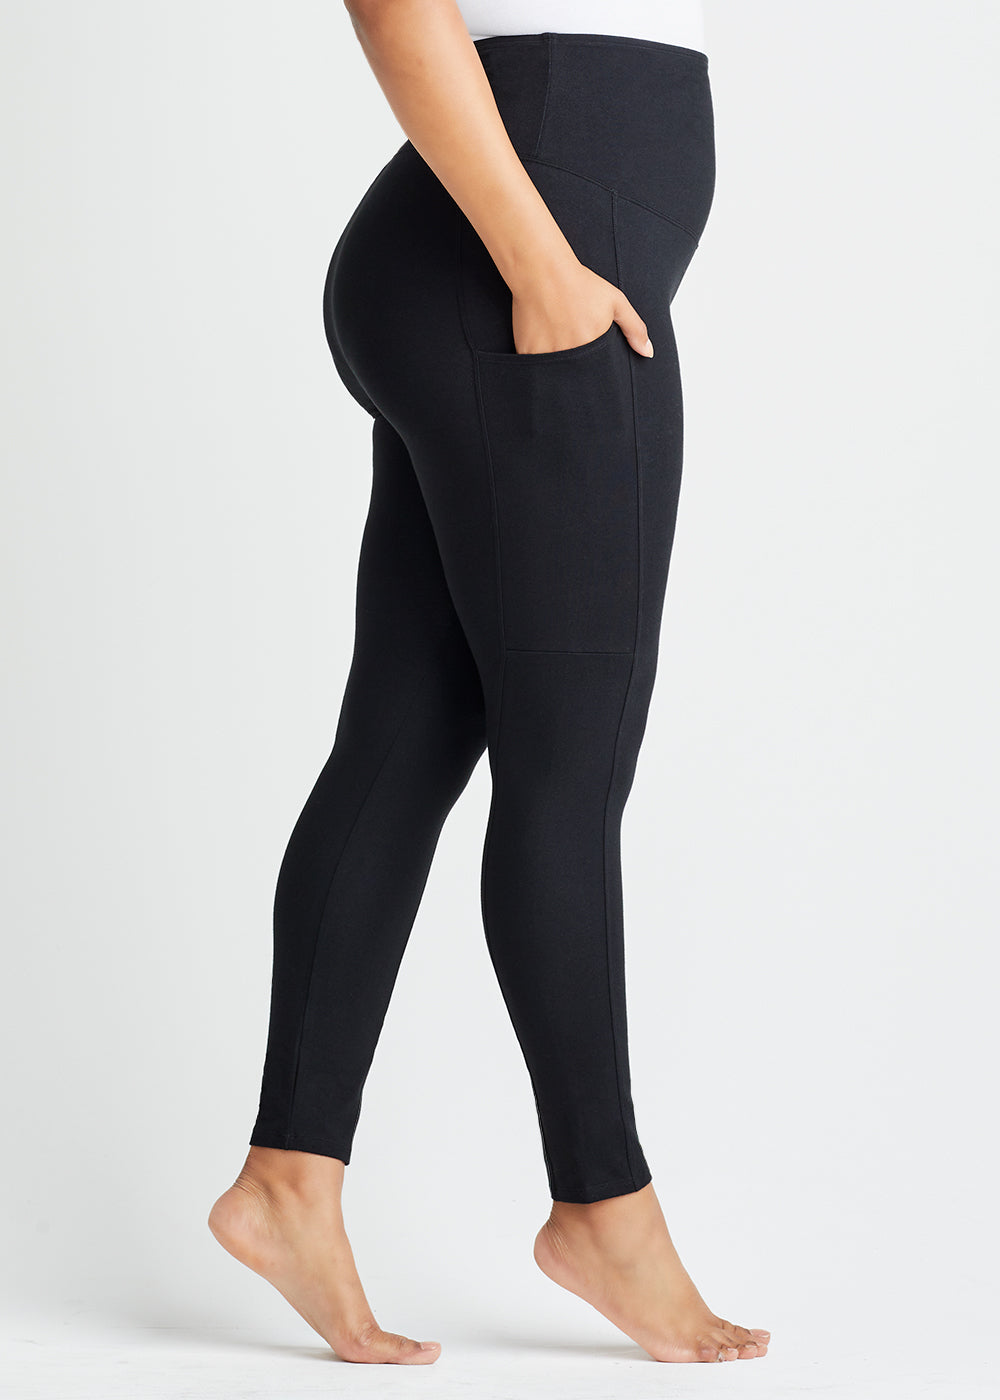 Rachel Shaping Legging with Side Pockets - Cotton Stretch from Yummie in Black  - 1